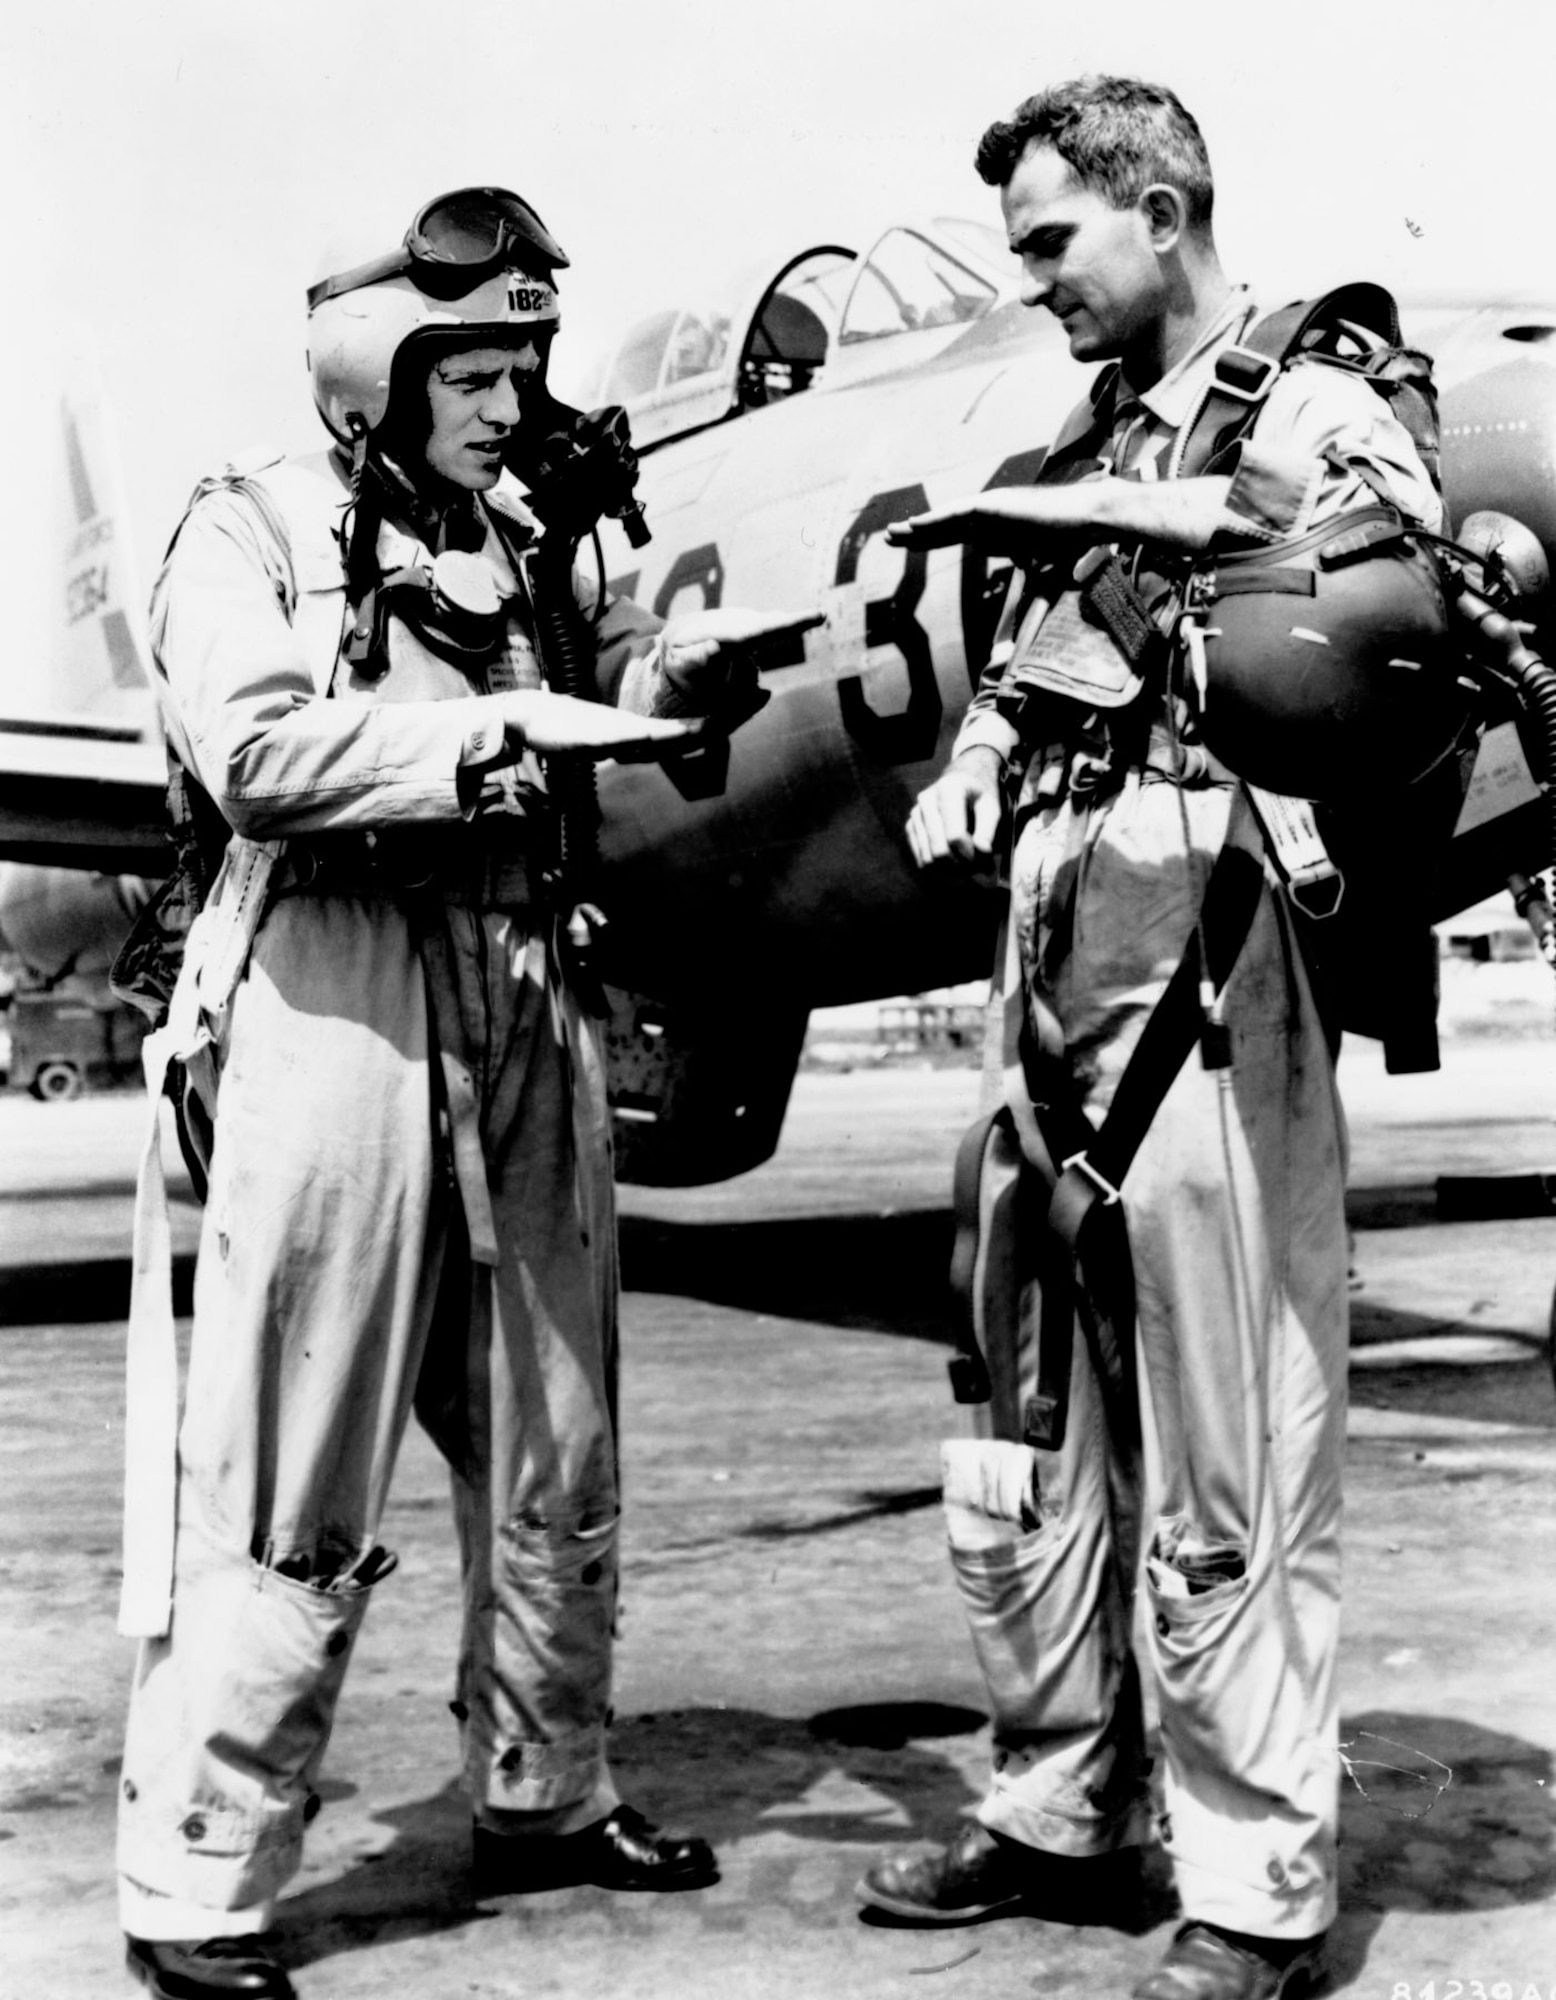 Texas Air National Guard pilots 1st Lt. Arthur Oligher (left) and Capt. Harry Underwood of the 182nd Fighter-Bomber Squadron, 136th Fighter-Bomber Wing, discuss downing a MiG-15 jet. Flying F-84s, their combined kill on June 26, 1951, was the first jet combat victory for Air Guard pilots. (U.S. Air Force photo)